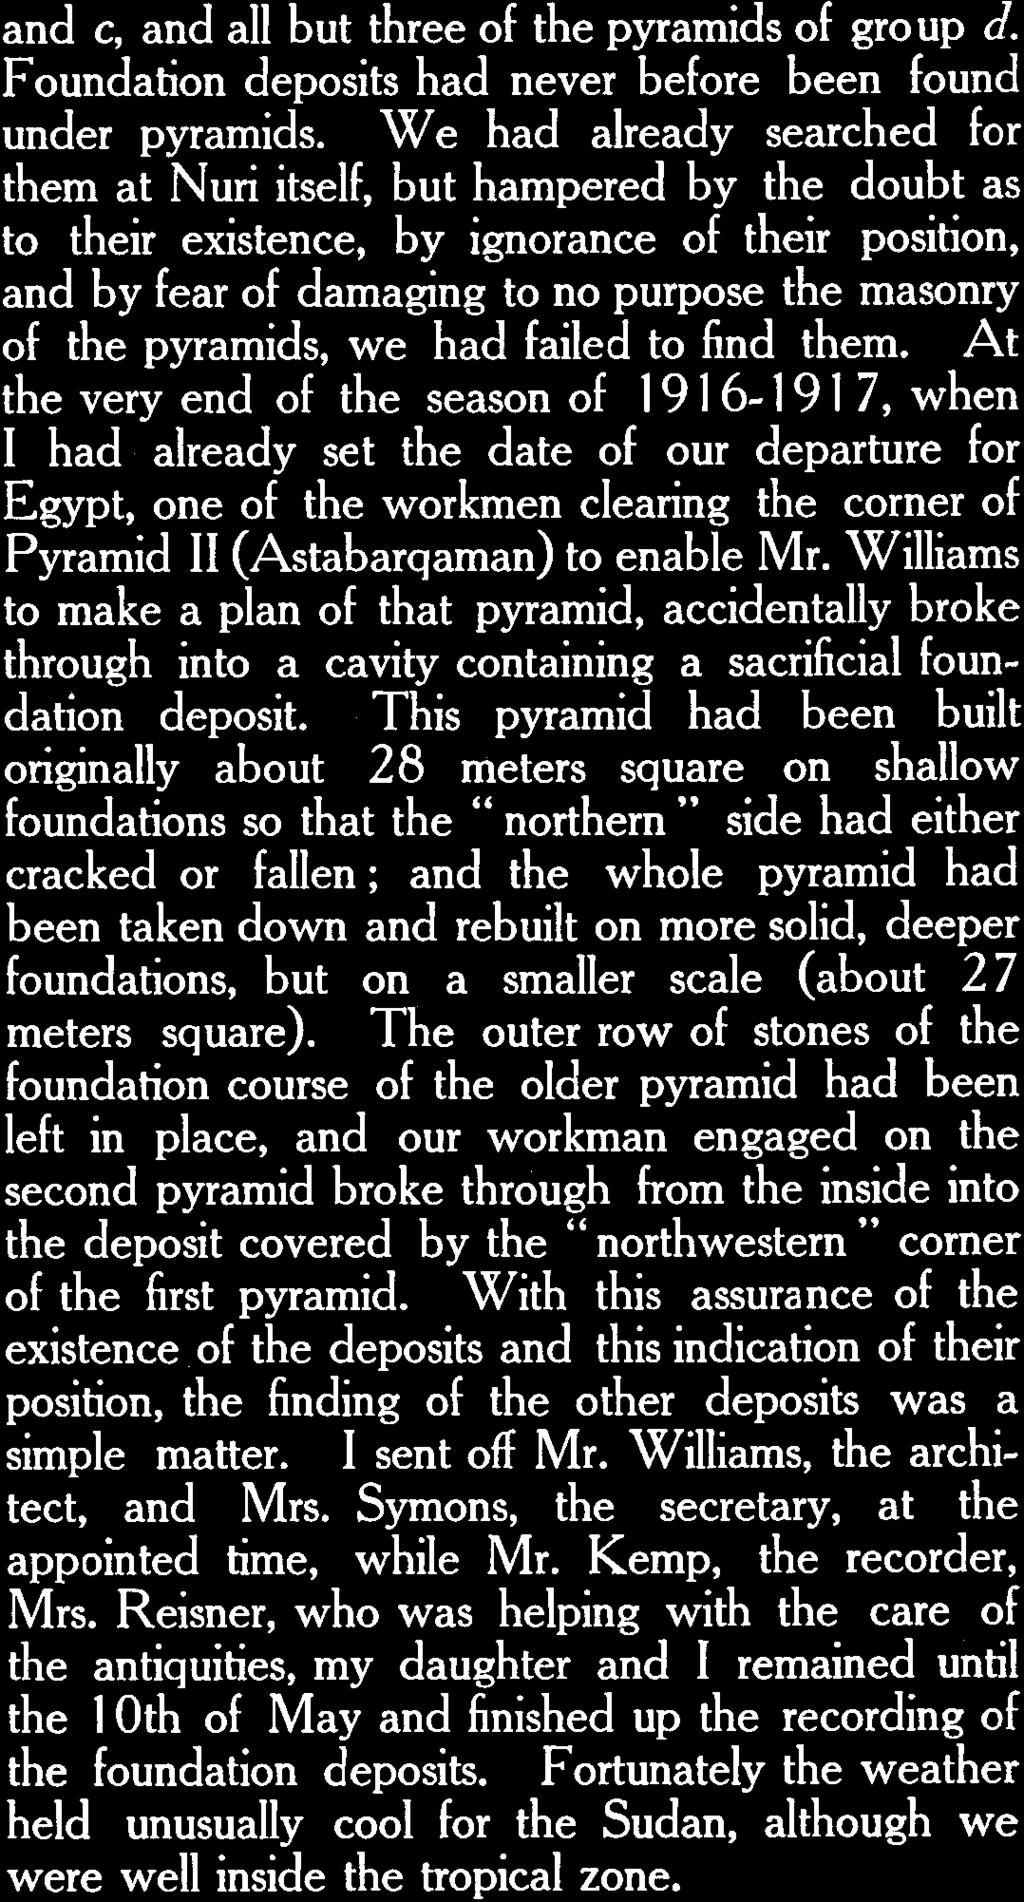 At the very end of the season of 1916-1917, when I had already set the date of our departure for Egypt, one of the workmen clearing the corner of Pyramid II (Astabarqaman) to enable Mr.